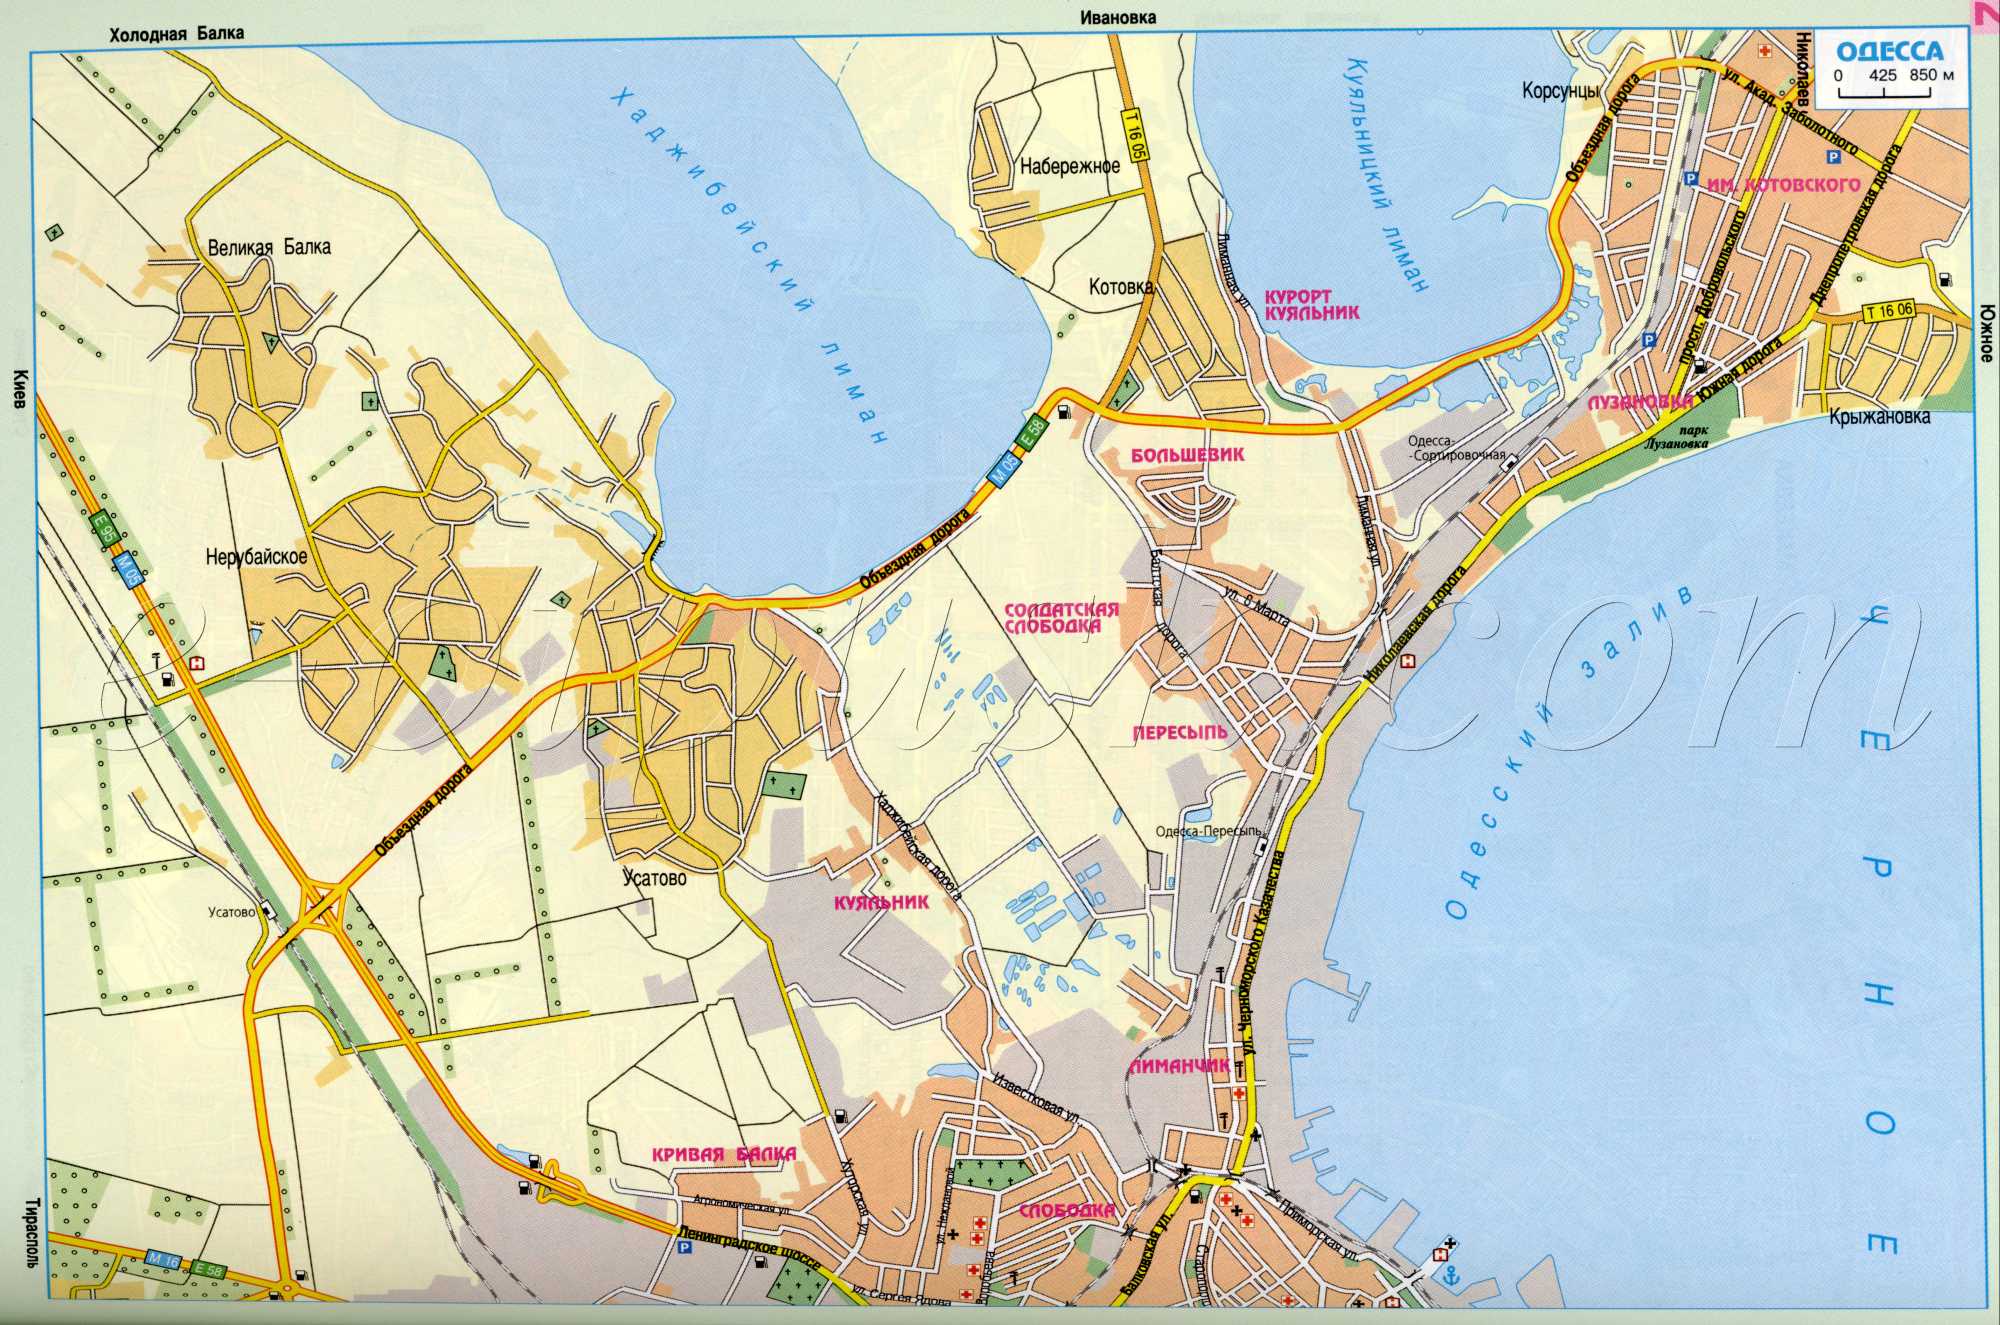 Map of Odessa. Map of the scheme of highways of the city of Odessa, Ukraine. download for free